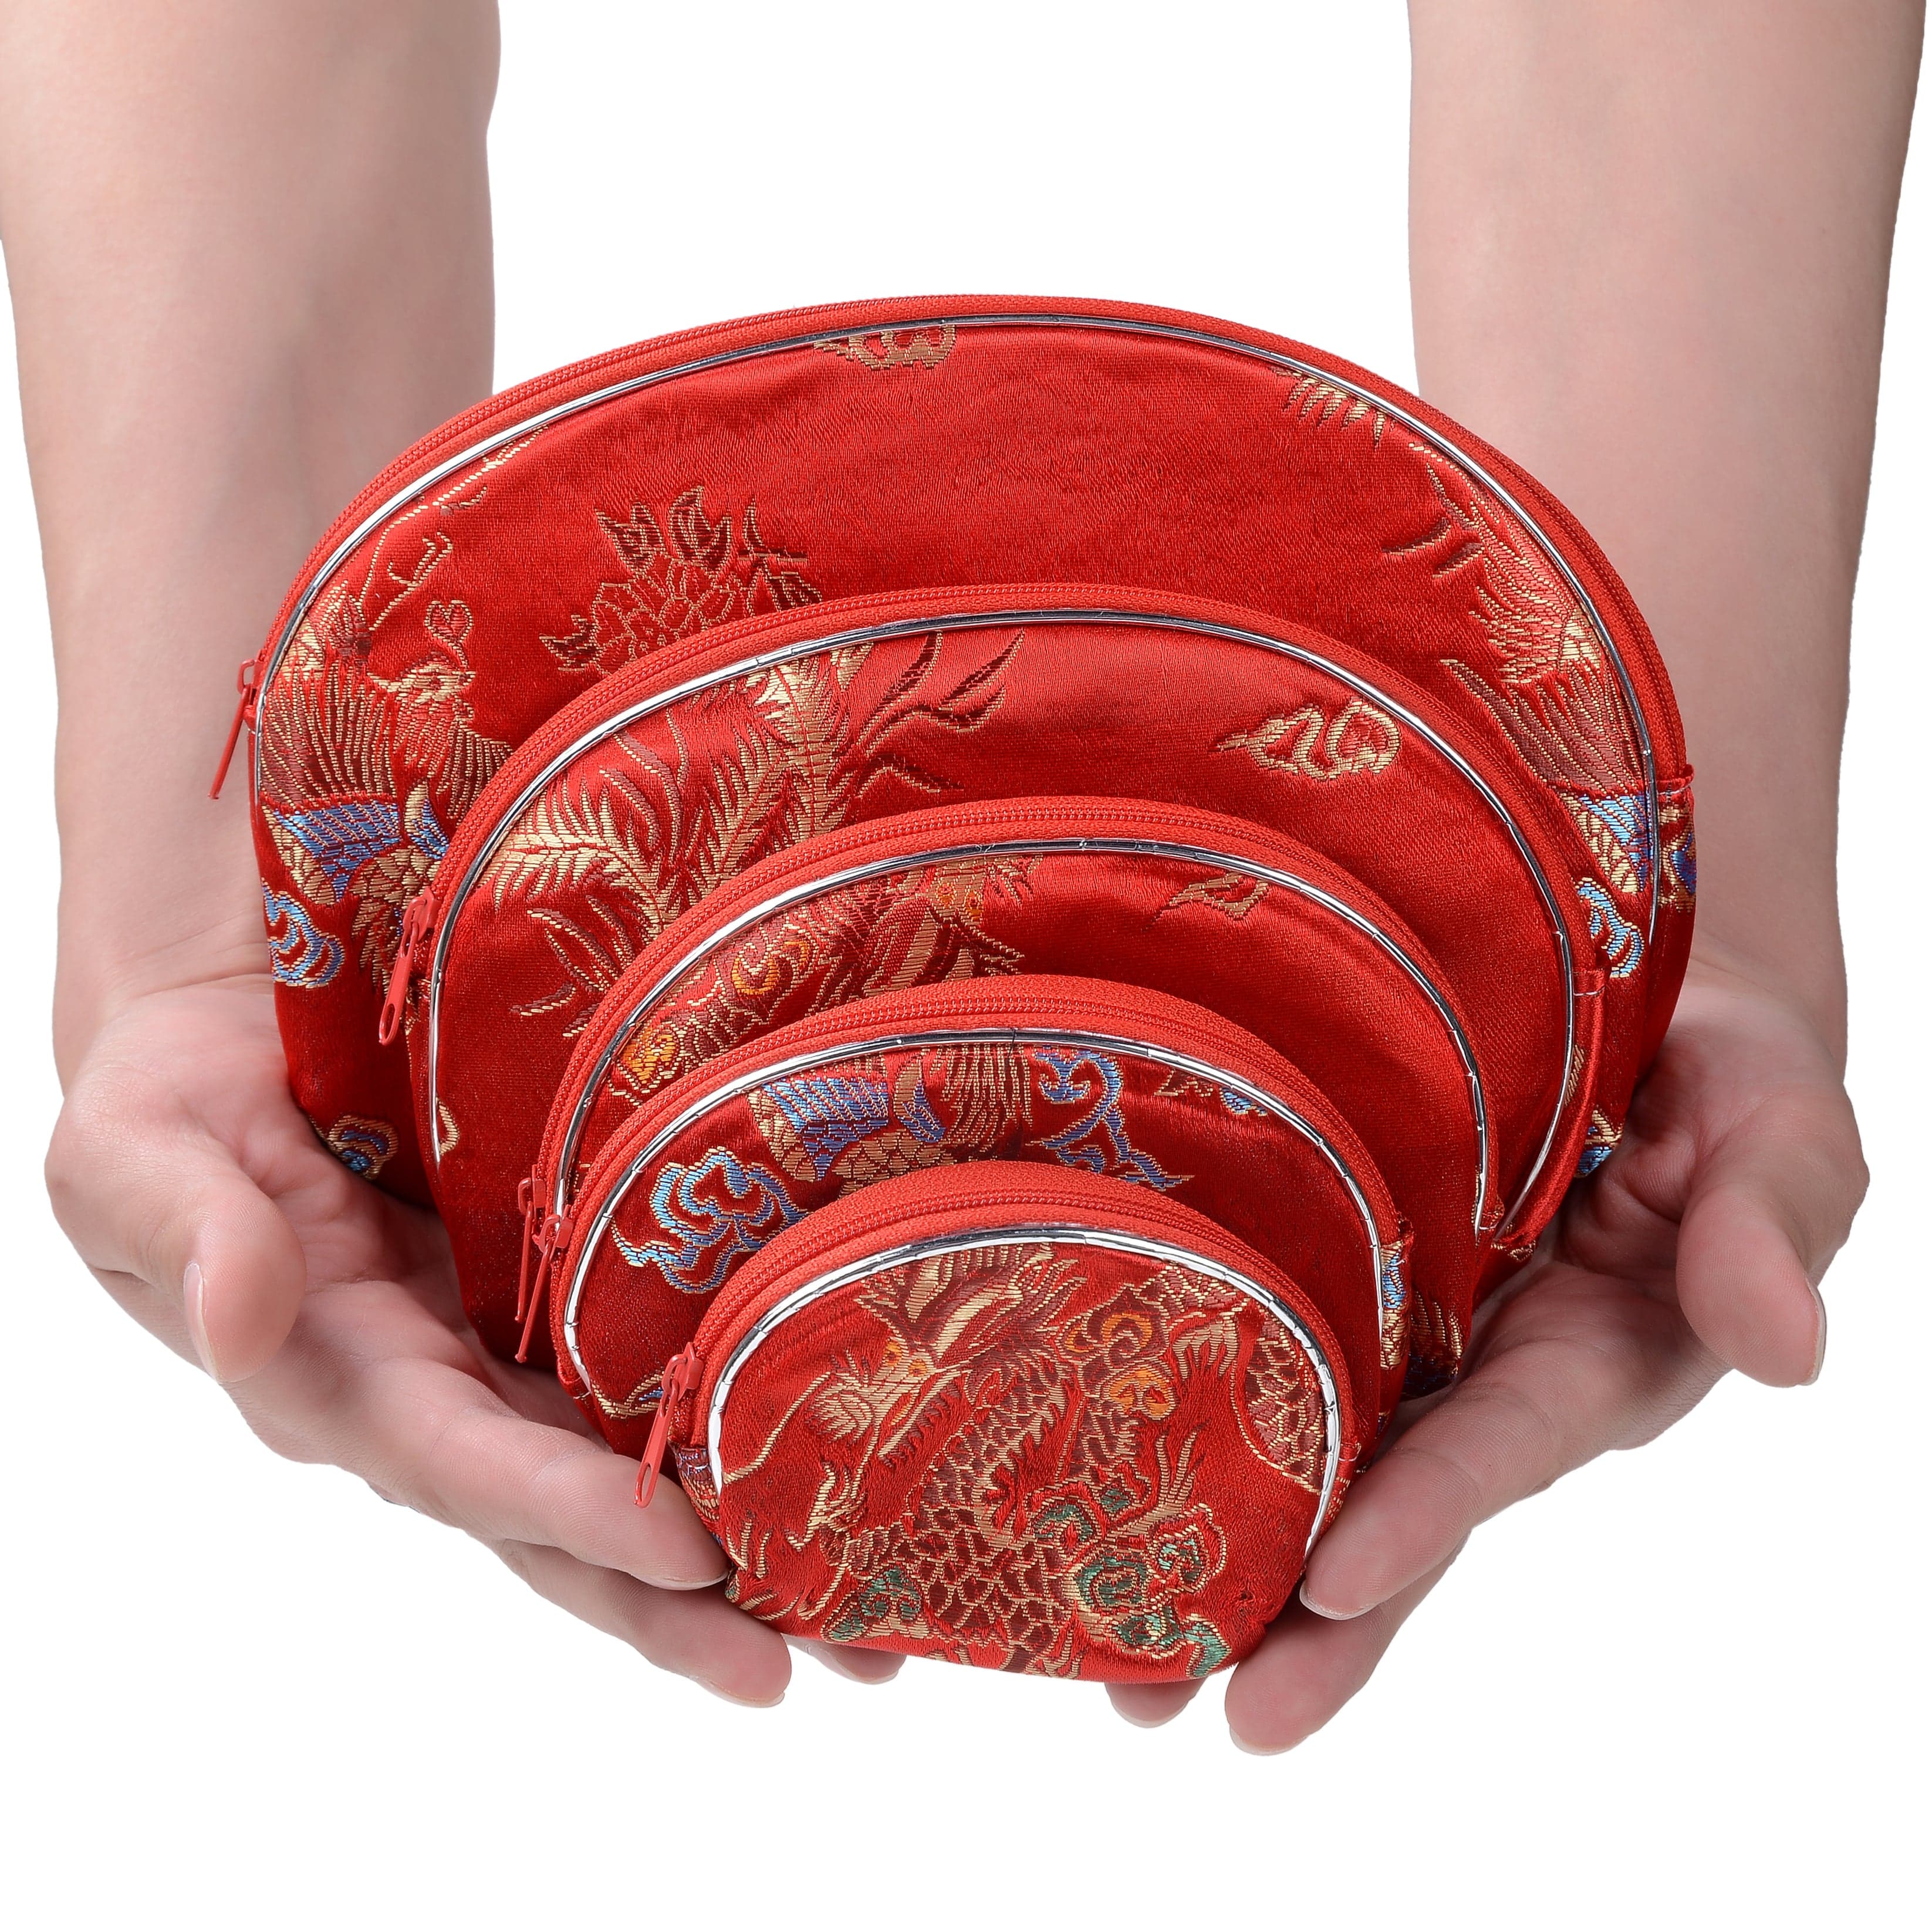 Kalifano JEWELRY POUCHES Red Dragon Silk Pouch - 5 piece set POUCH5-RD